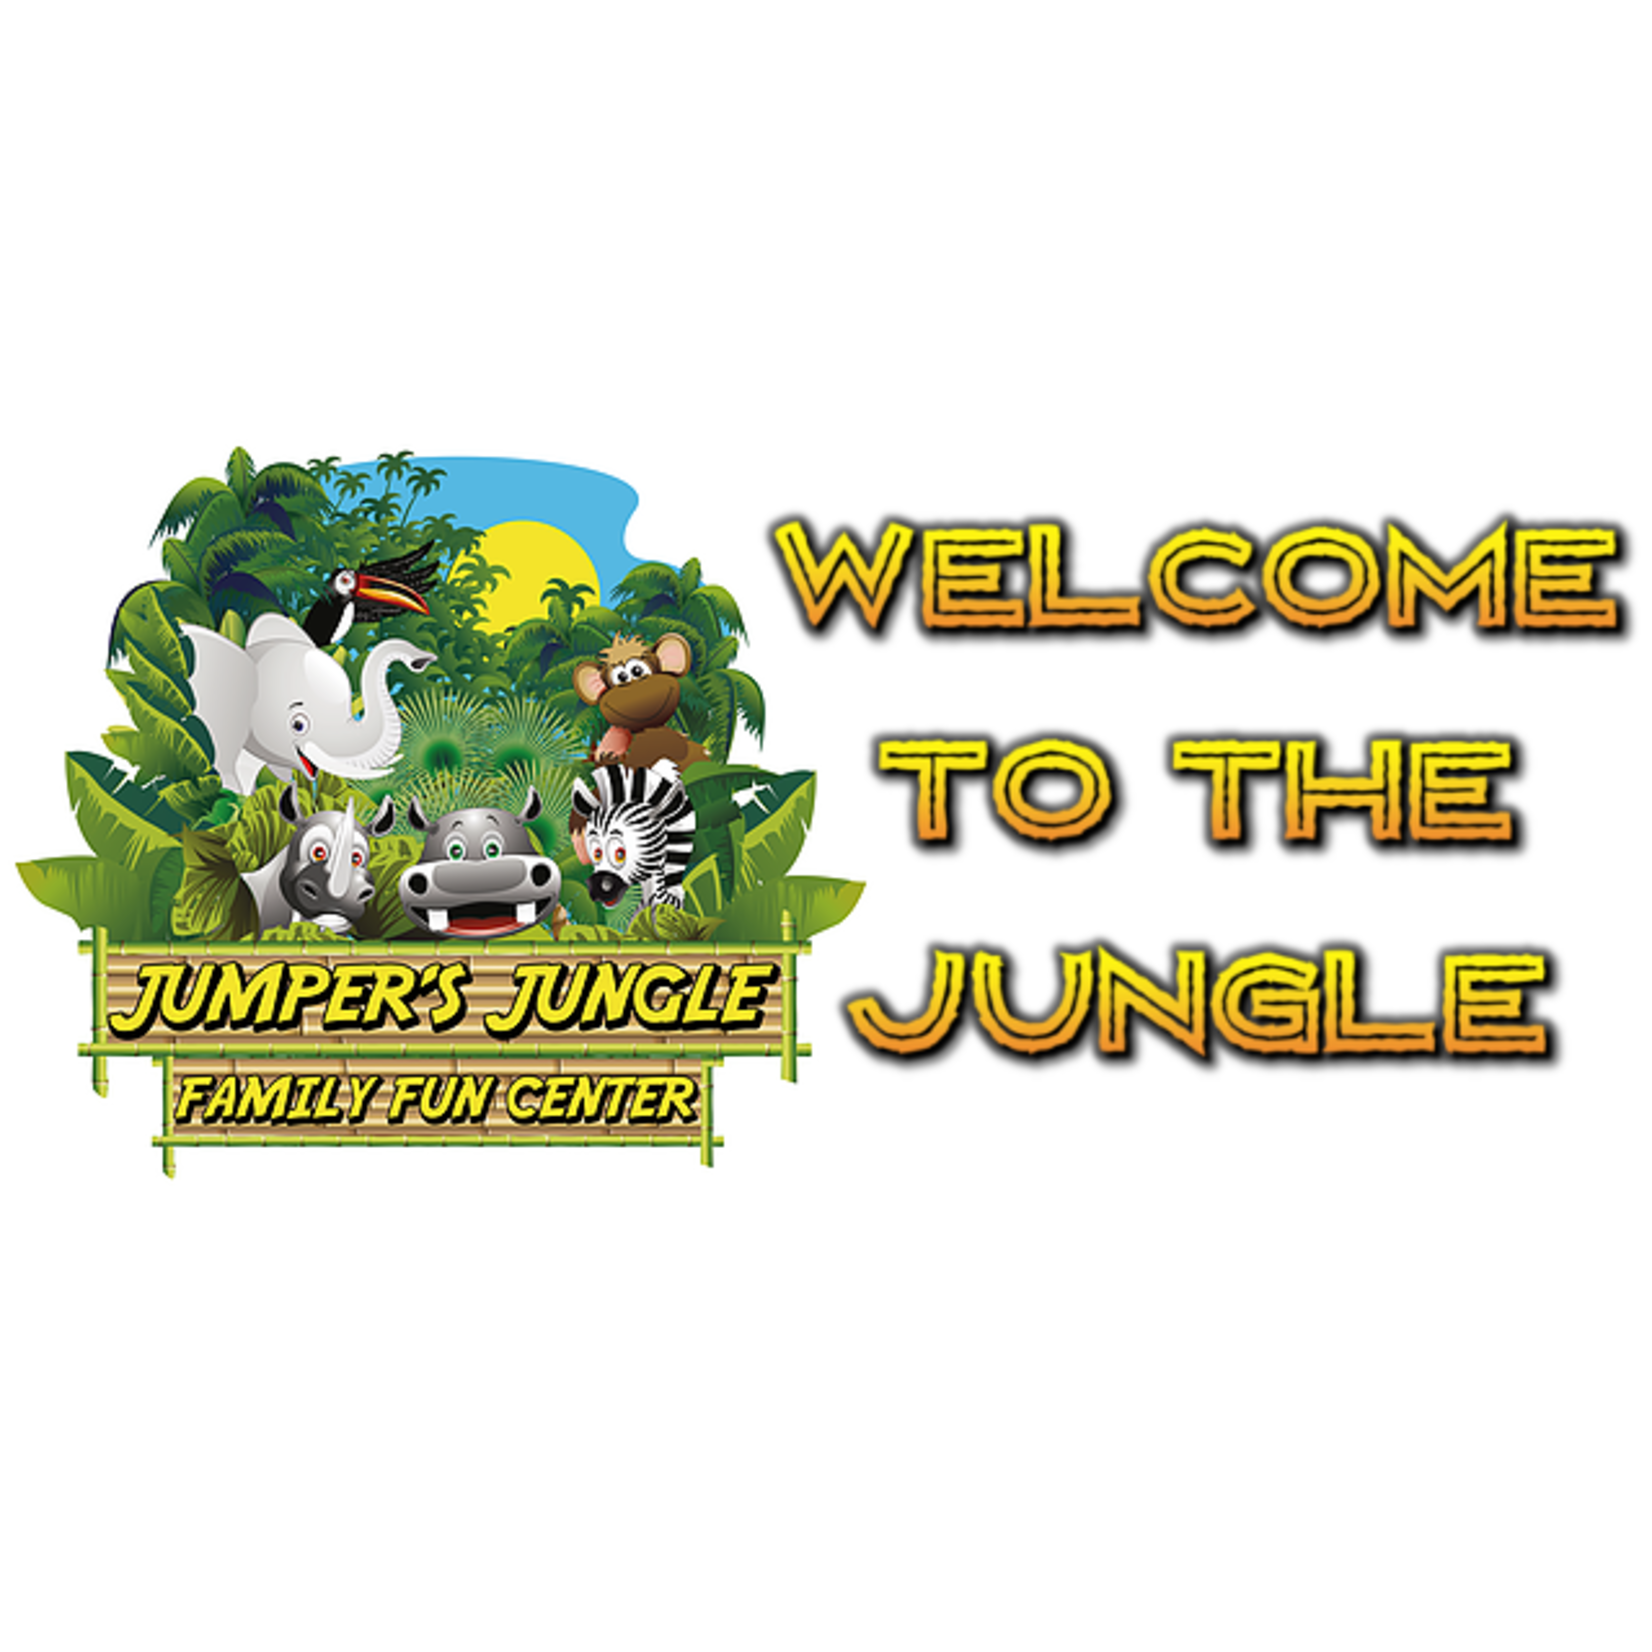 Jumpers Jungle Las Vegas Jumpers Jungle Las Vegas $7 - All Day Admission Toddler (2 under)